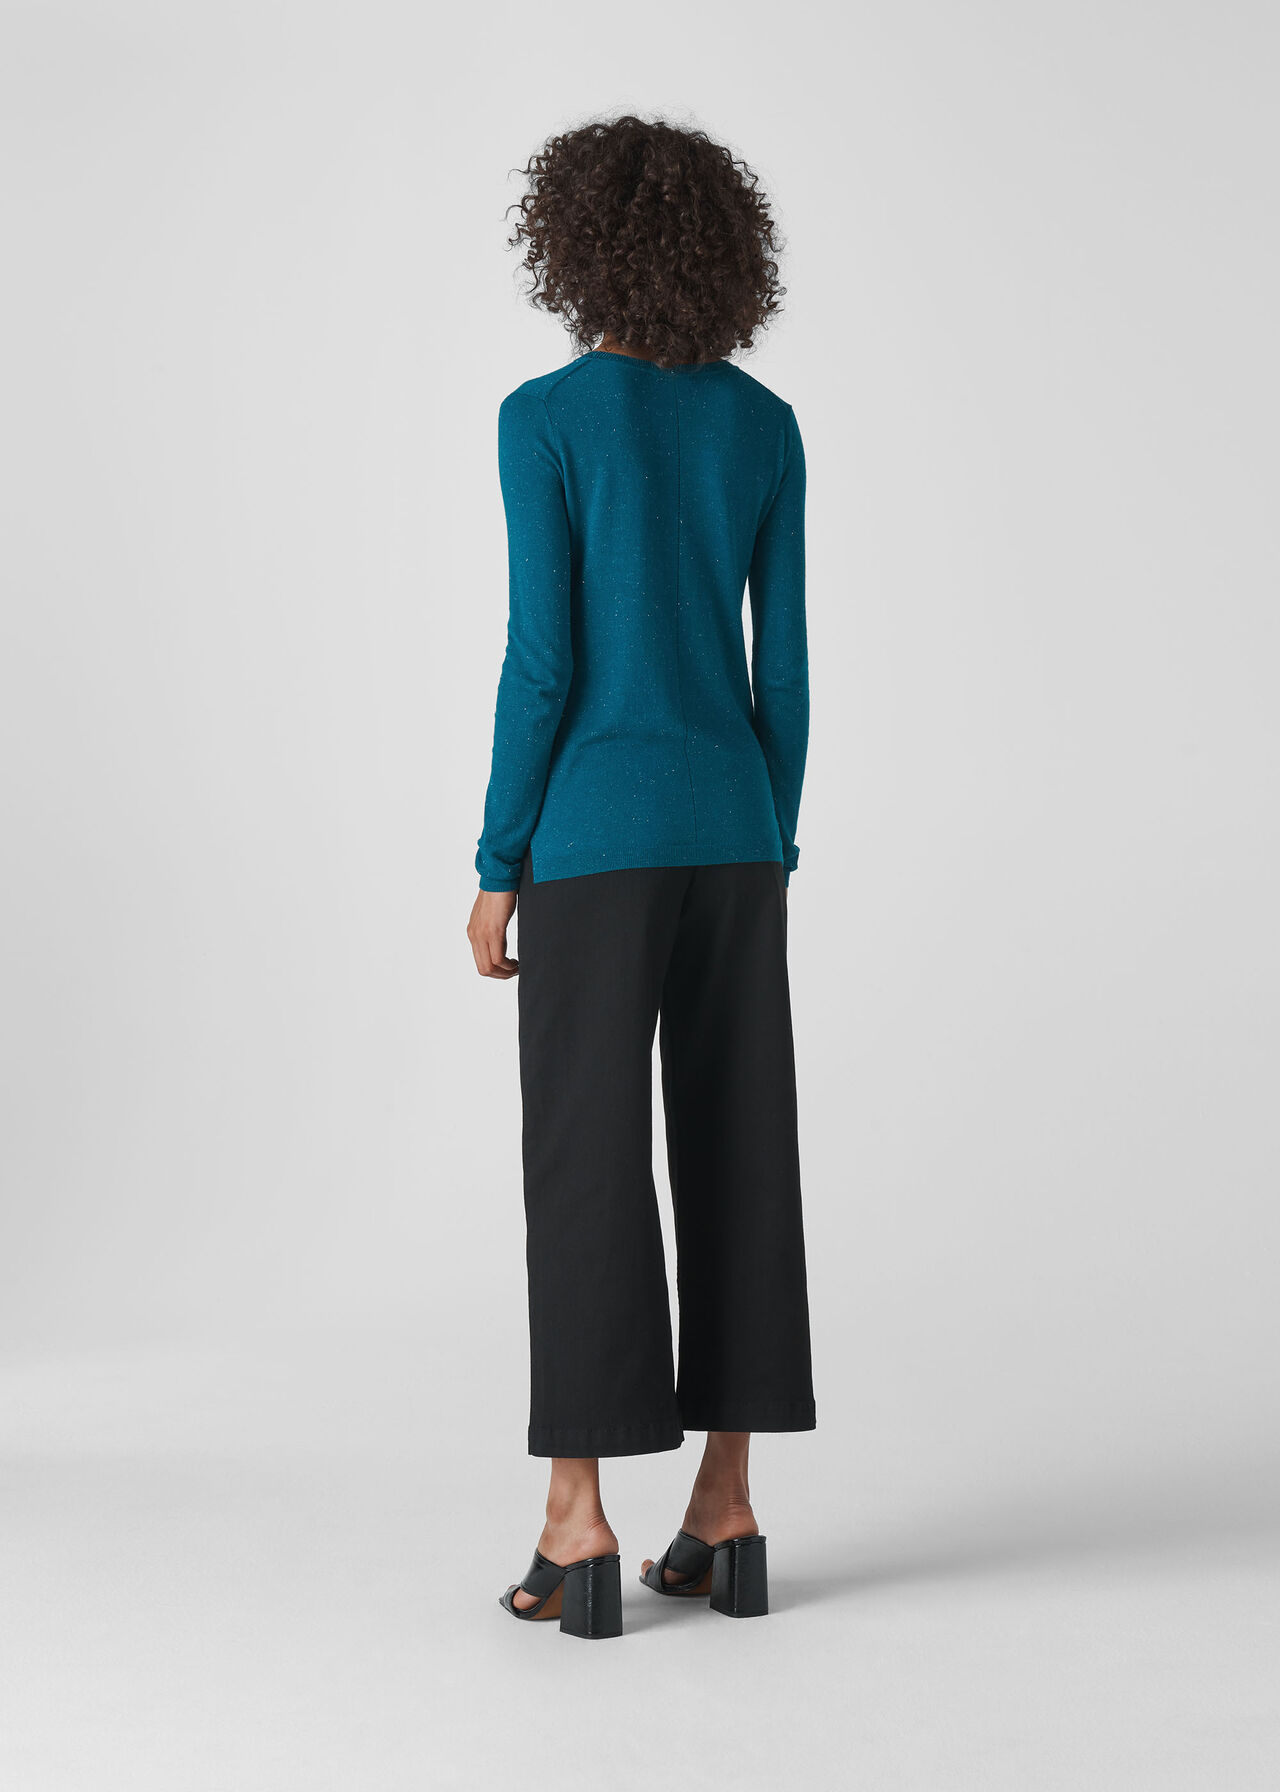 Teal Annie Sparkle Knit | WHISTLES